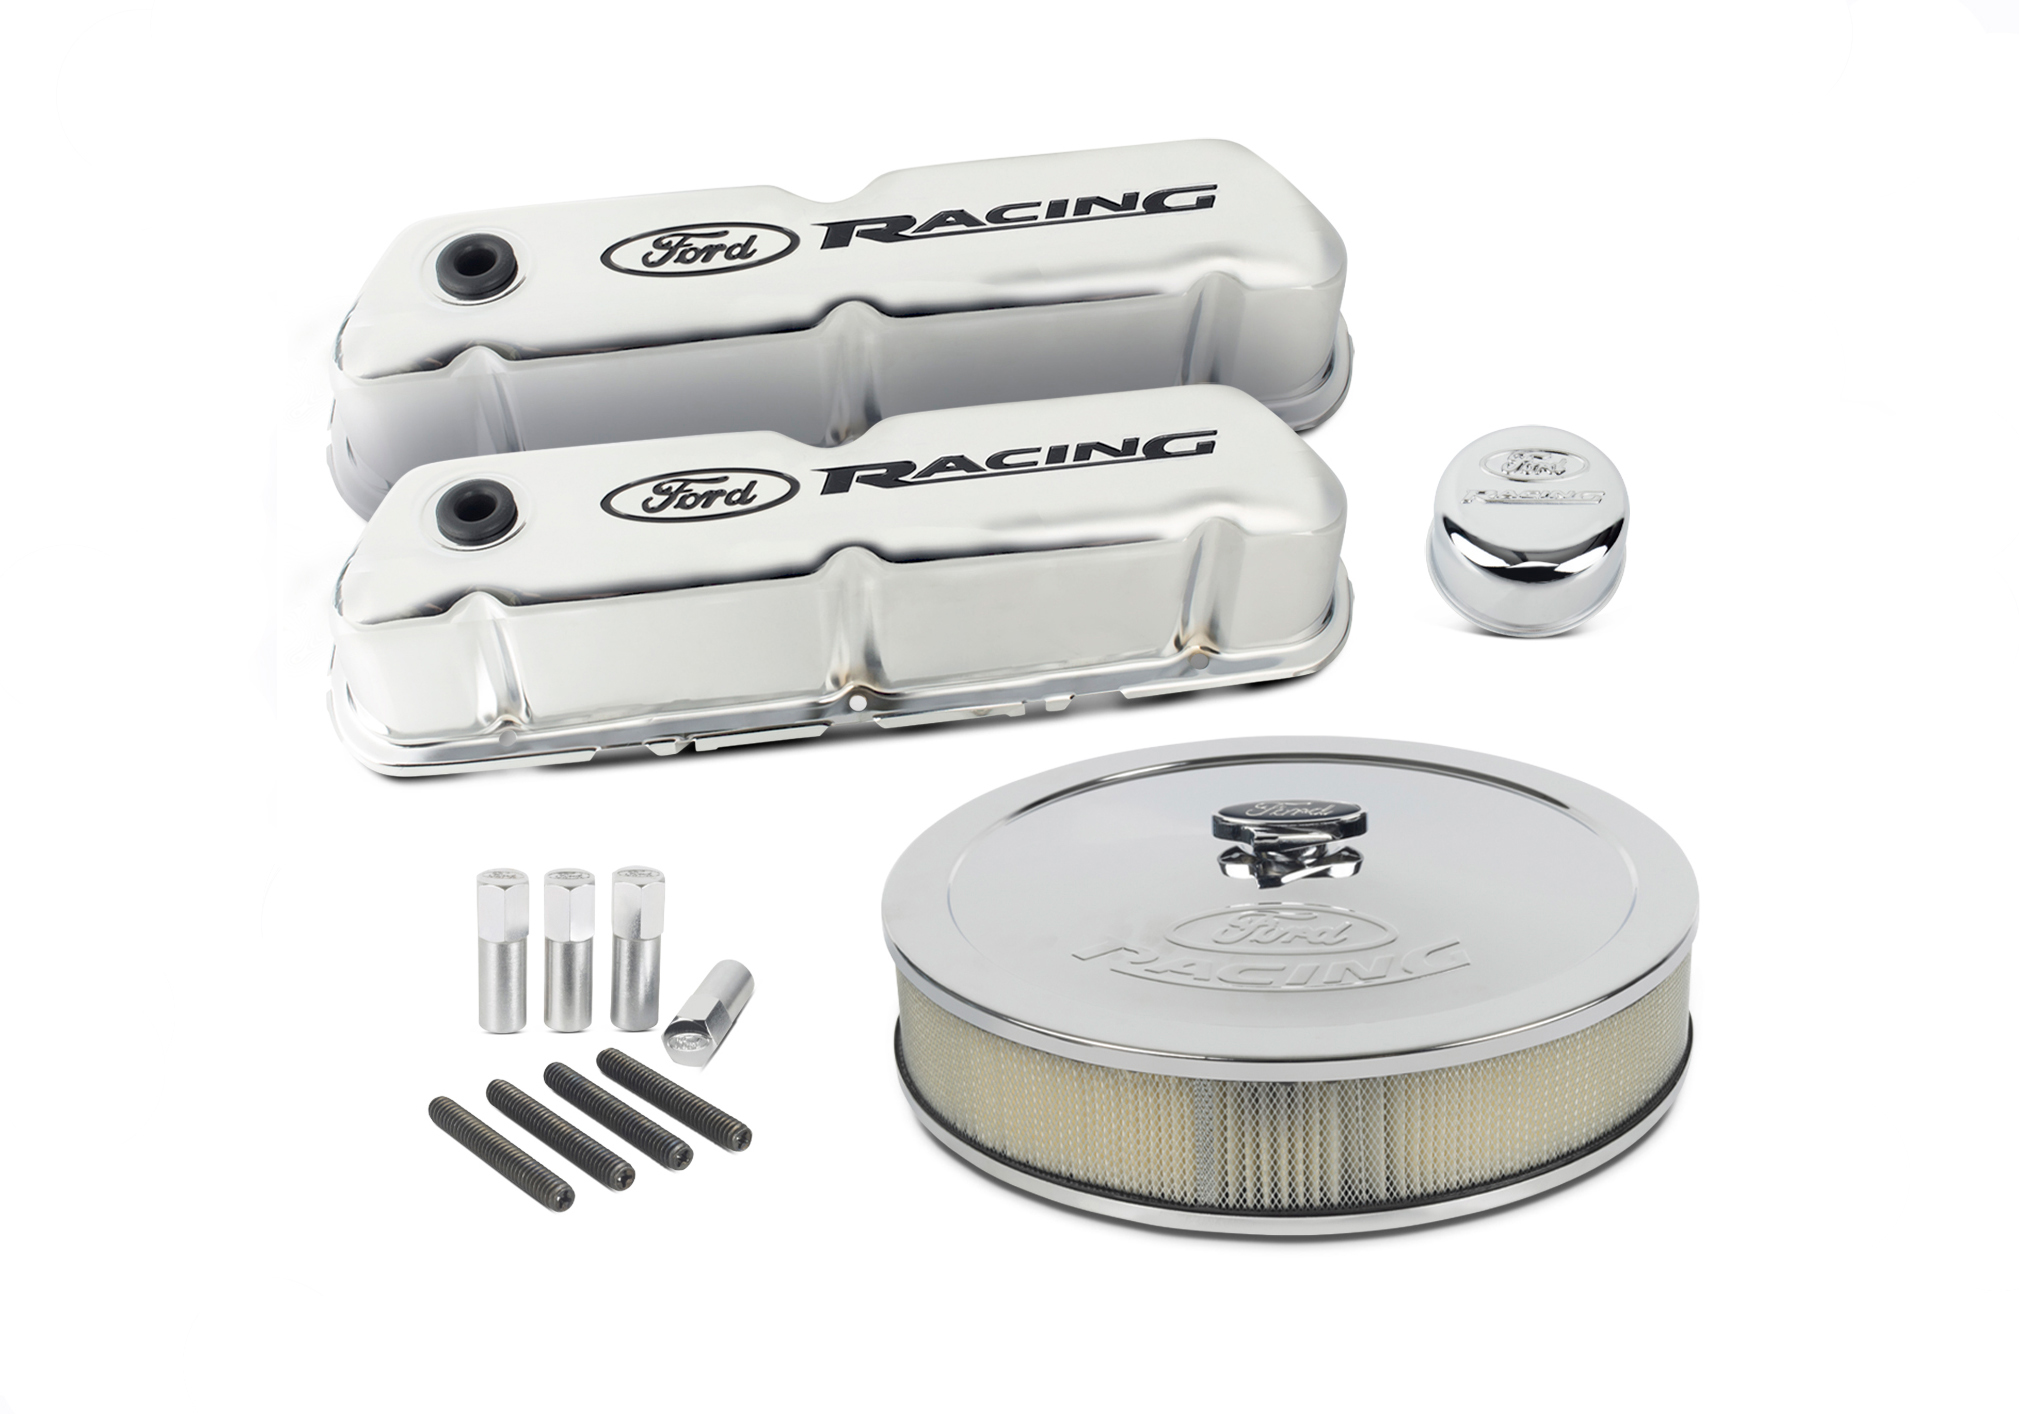 FORD RACING COMPLETE DRESS UP KIT, CHROME FINISH WITH BLACK